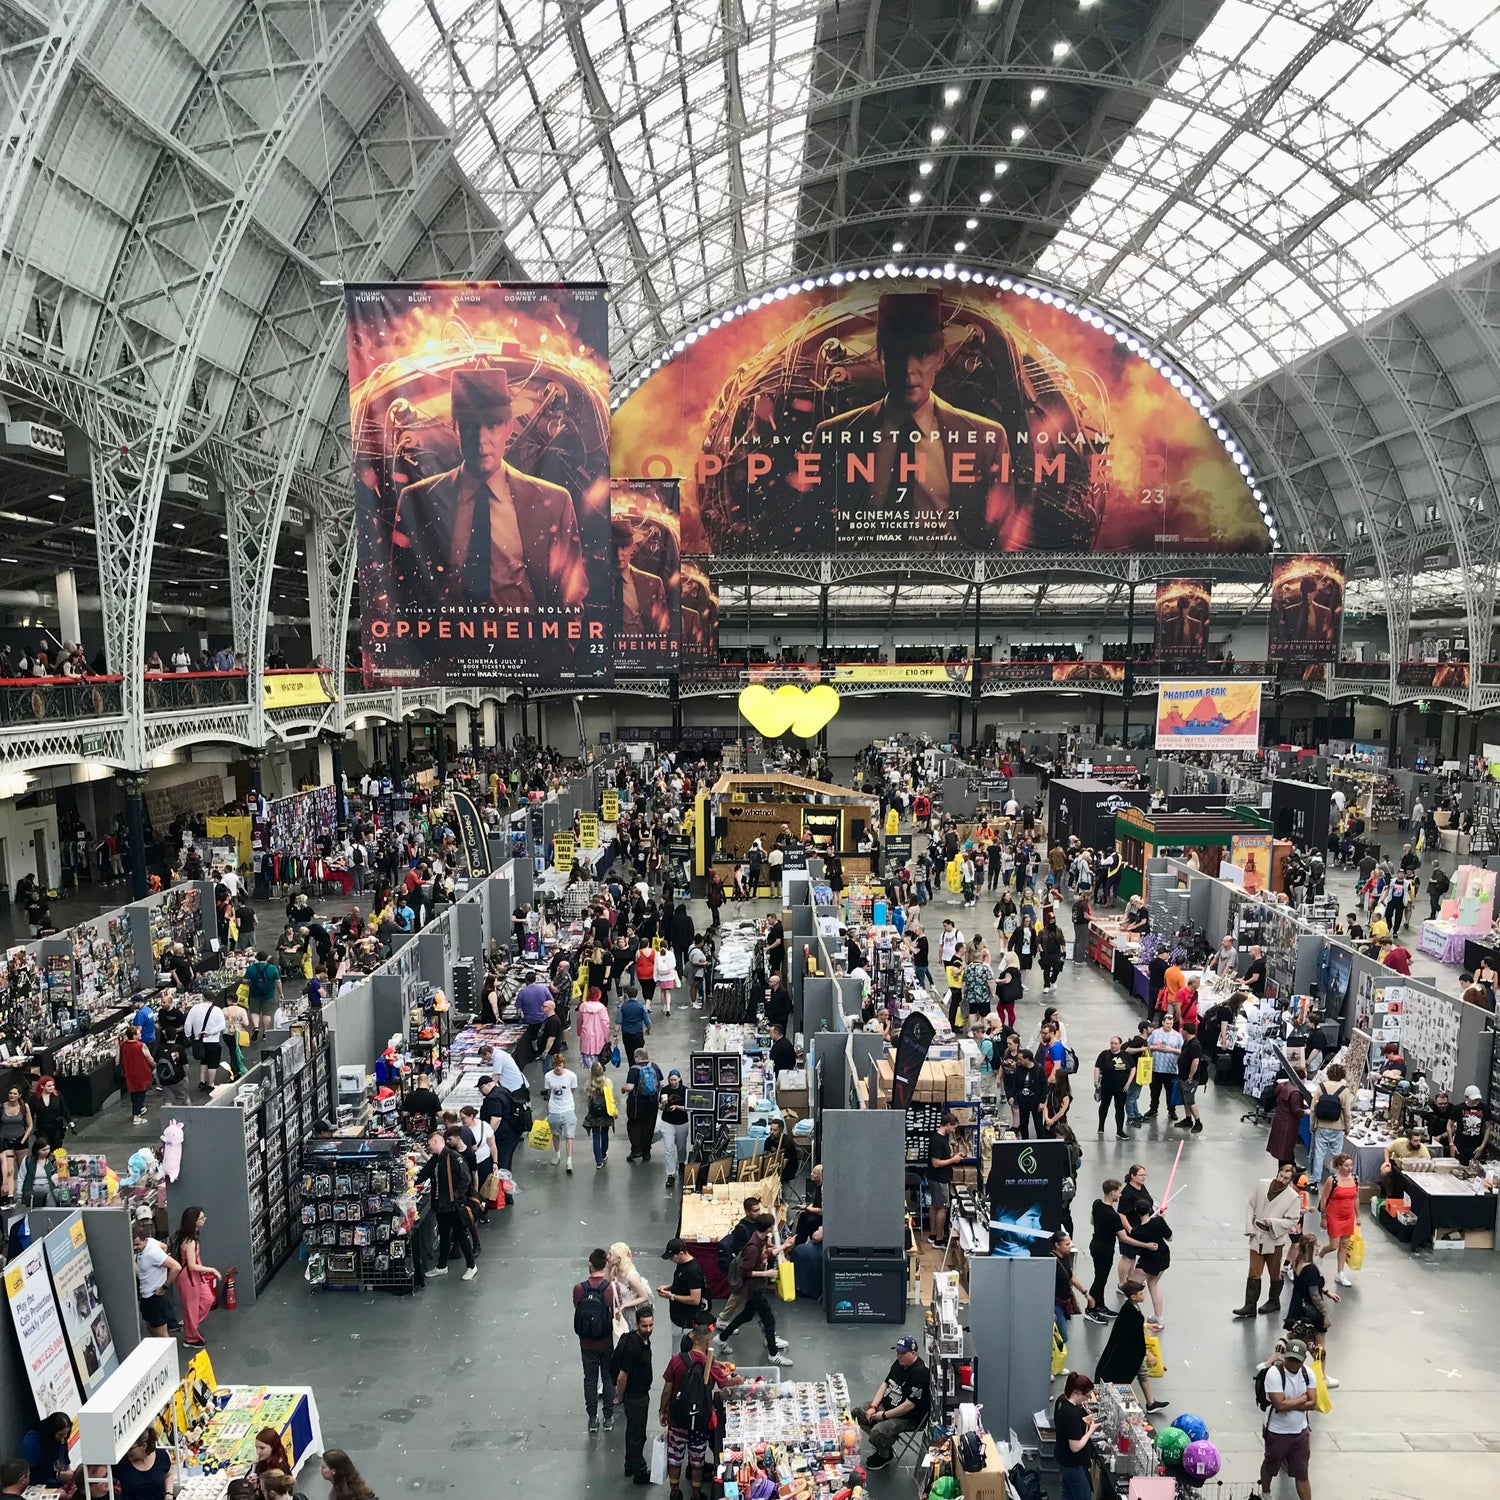 LFCC London Film and Comic Con, TTRPG dice sets for DND Dungeons and Dragons and dice goblin collectors